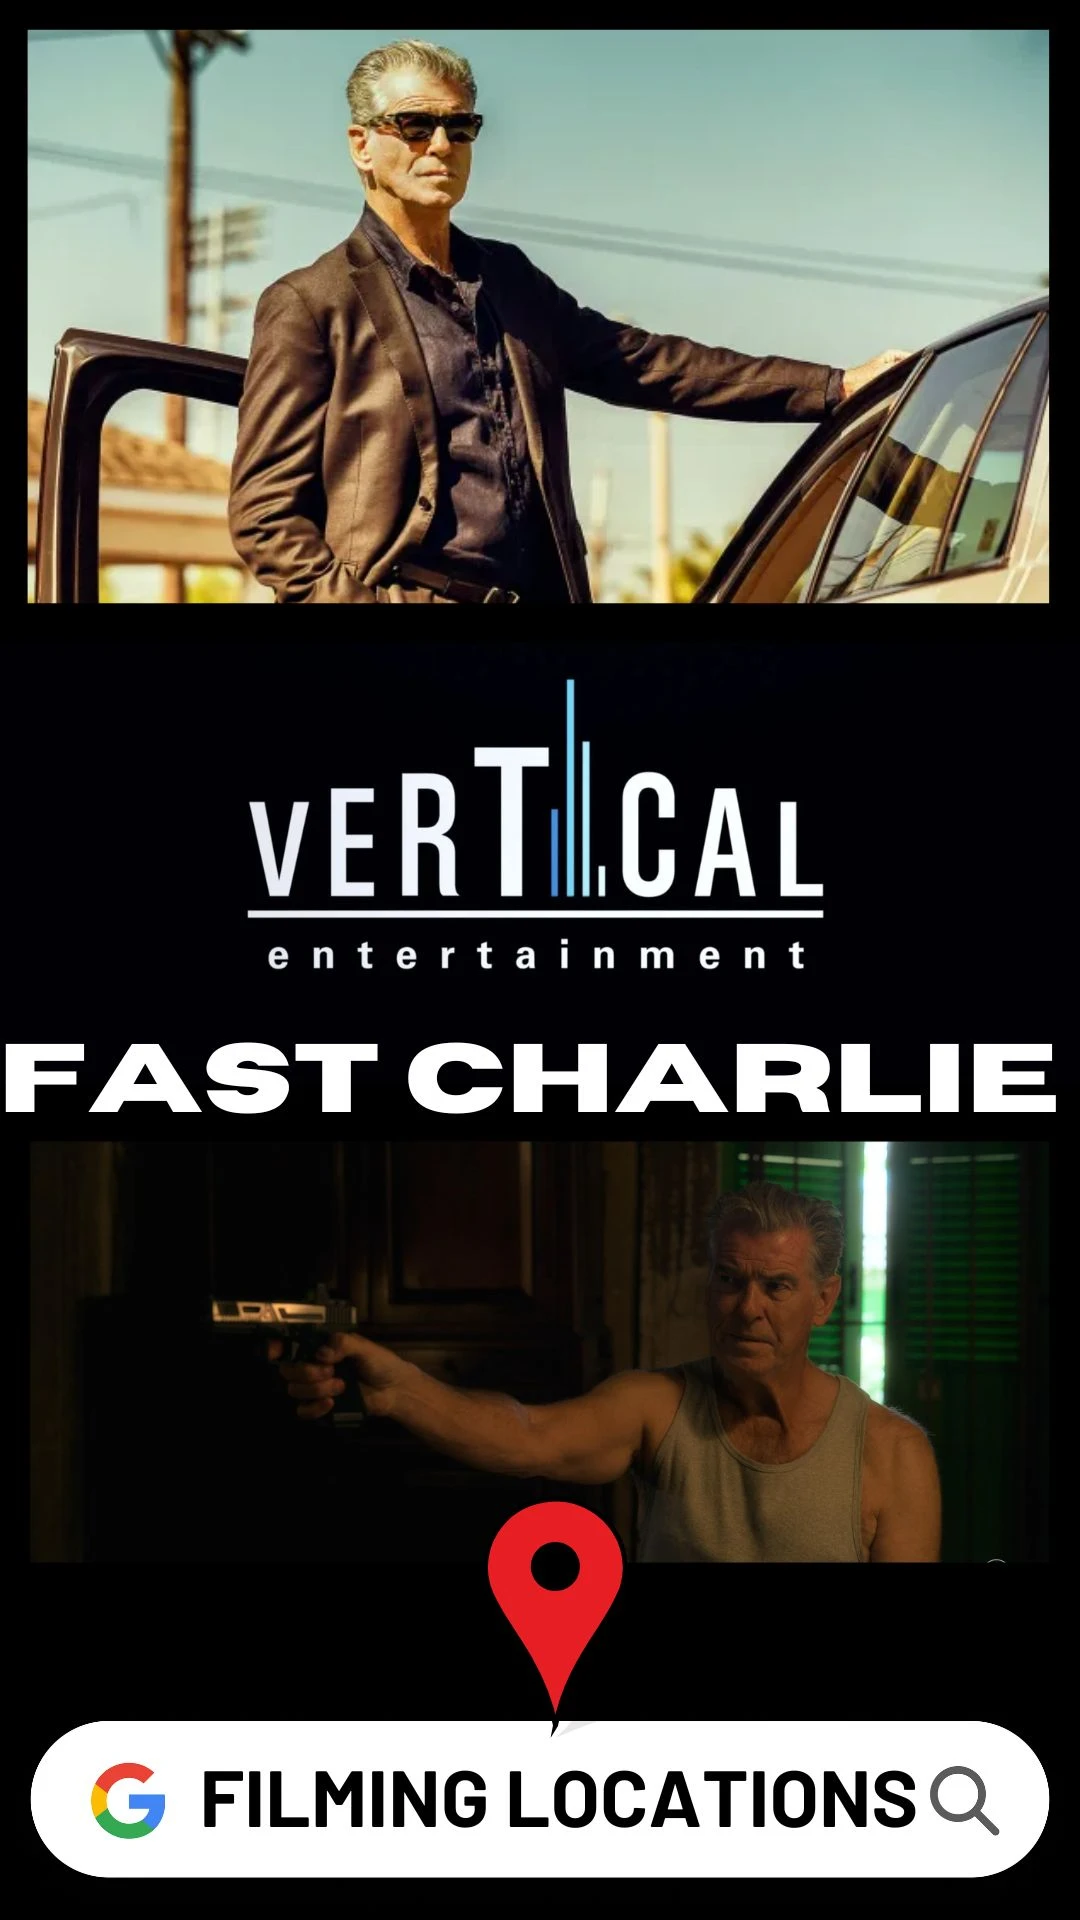 Fast Charlie Filming Locations